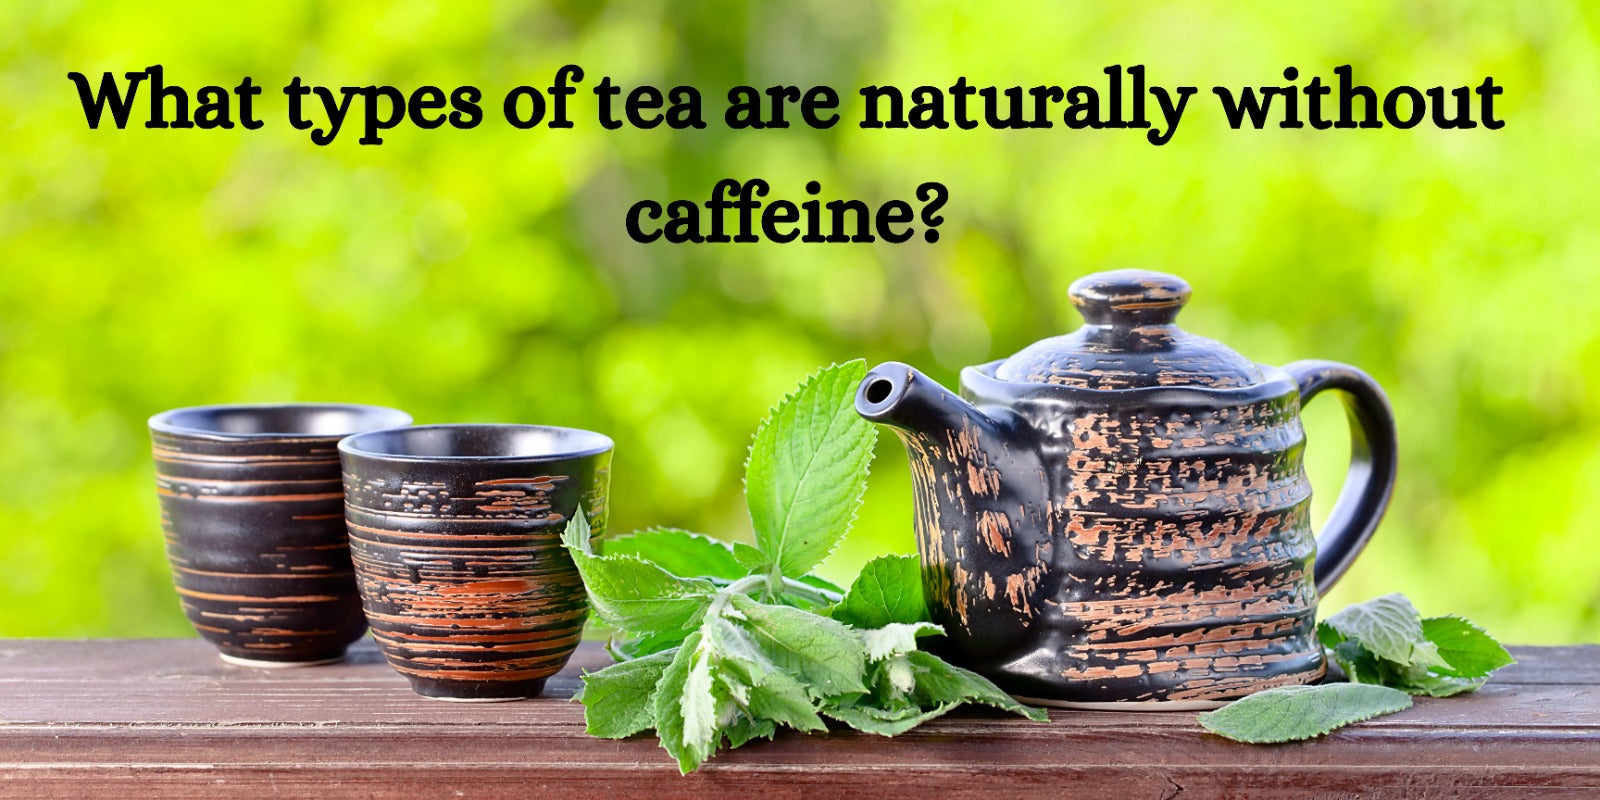 What types of tea are naturally without caffeine?